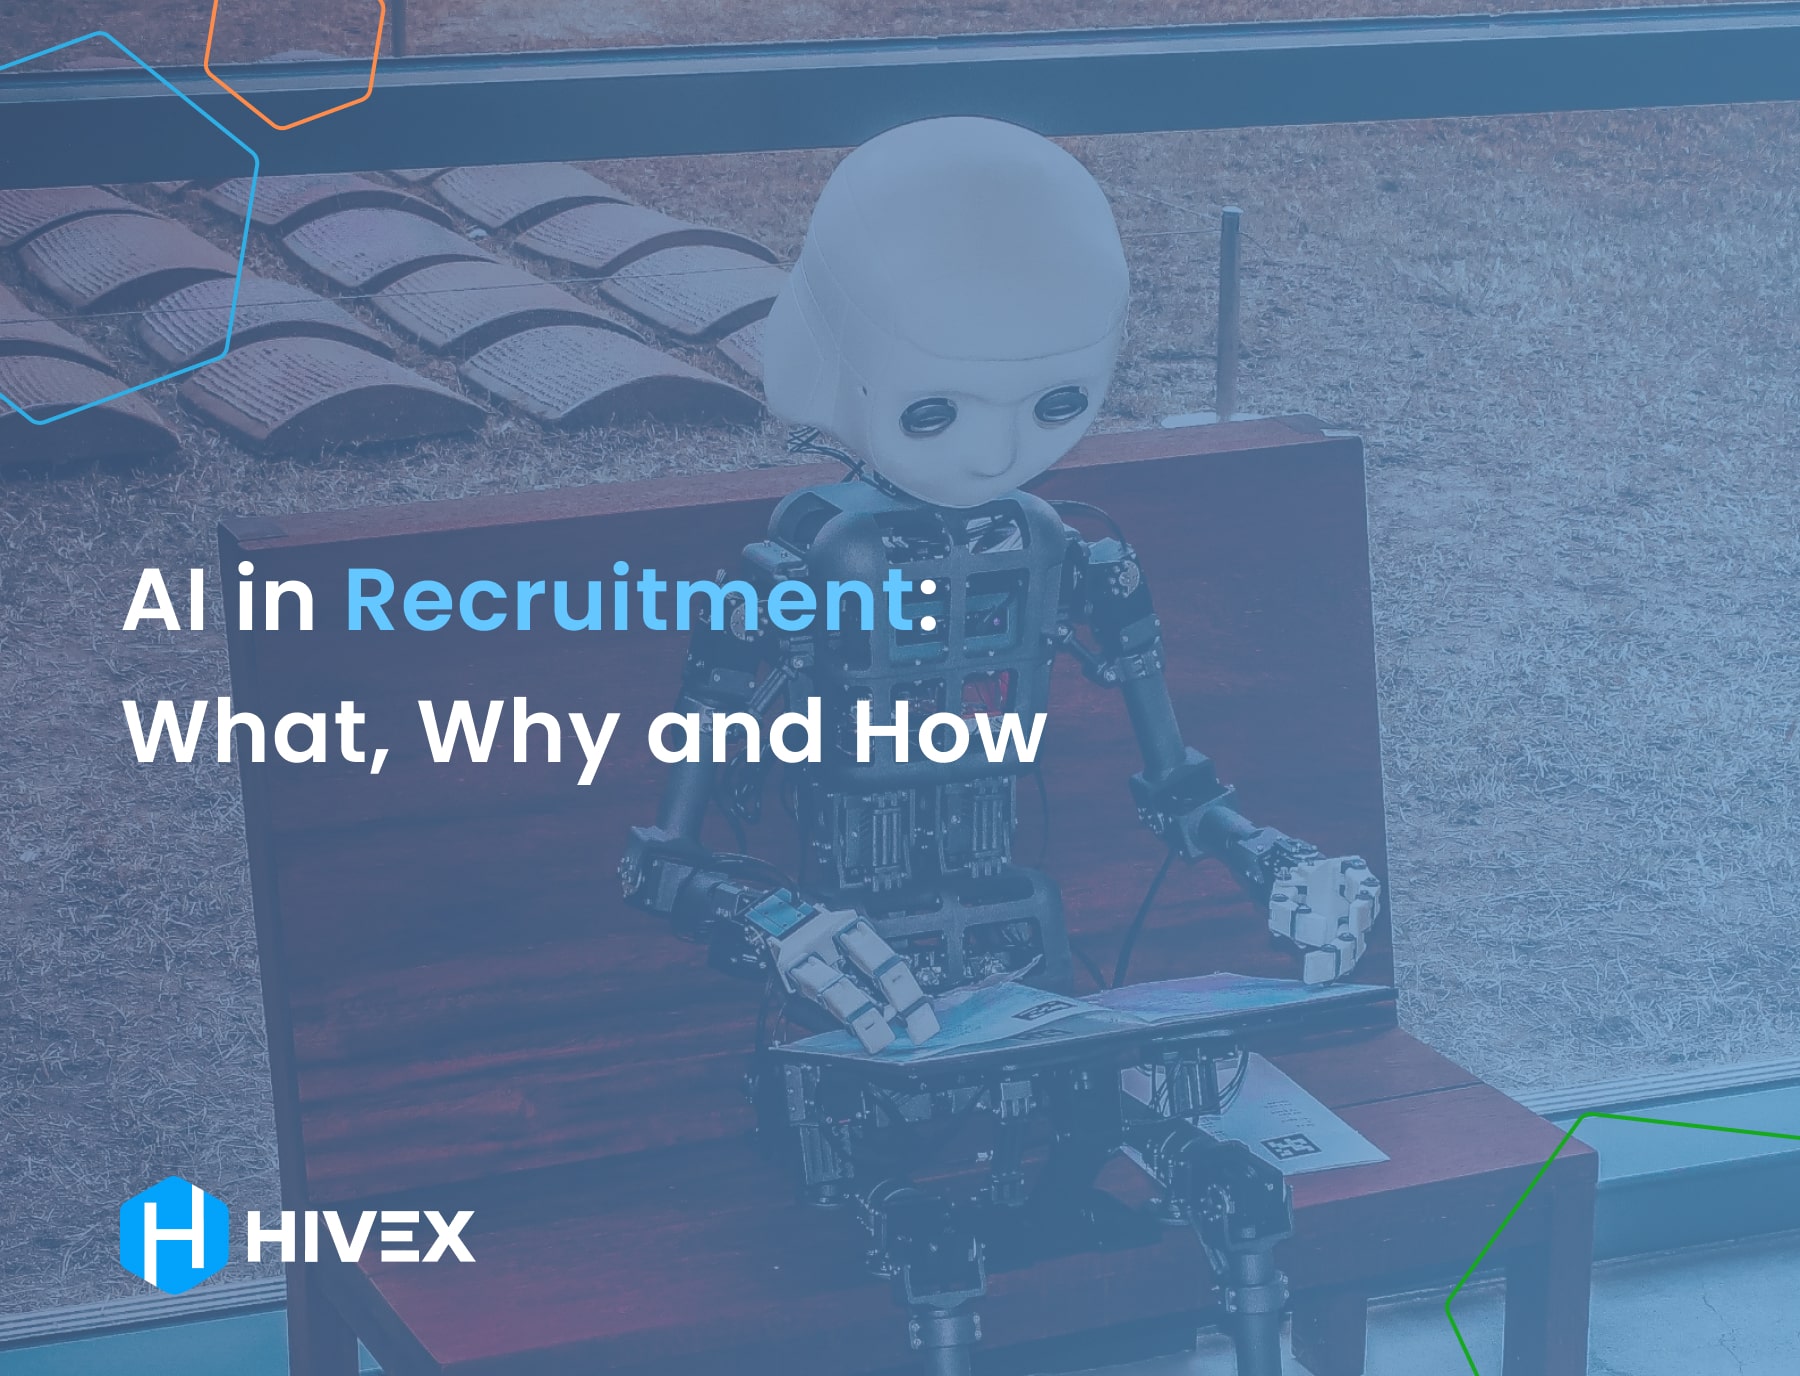 AI in Recruitment: What, Why and How